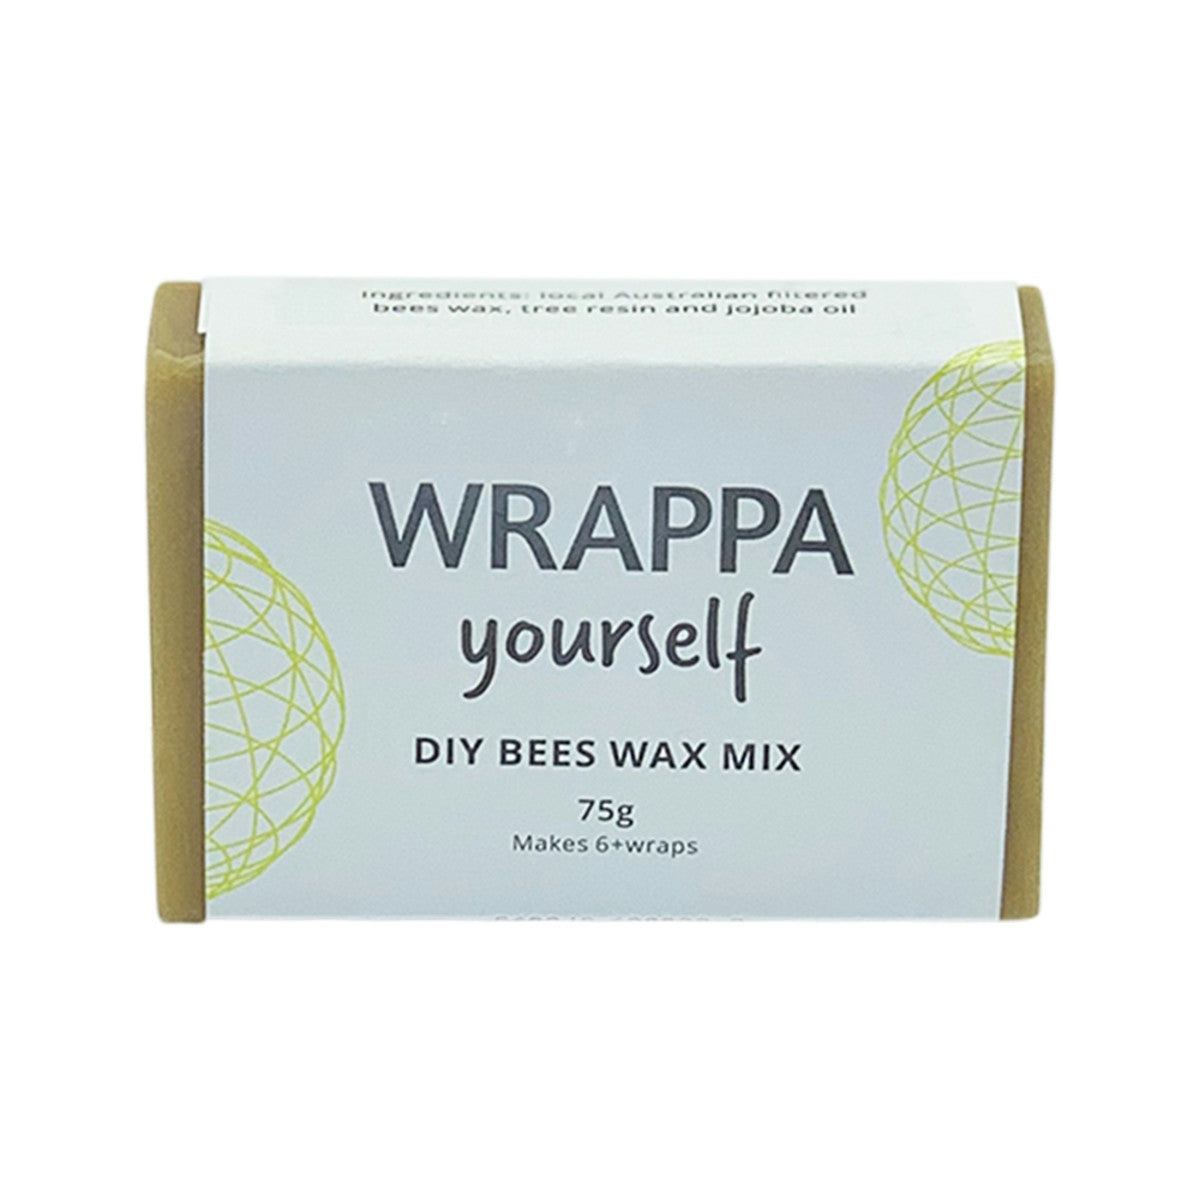 image of WRAPPA Yourself (DIY Wax Mix) Beeswax 75g on white background 